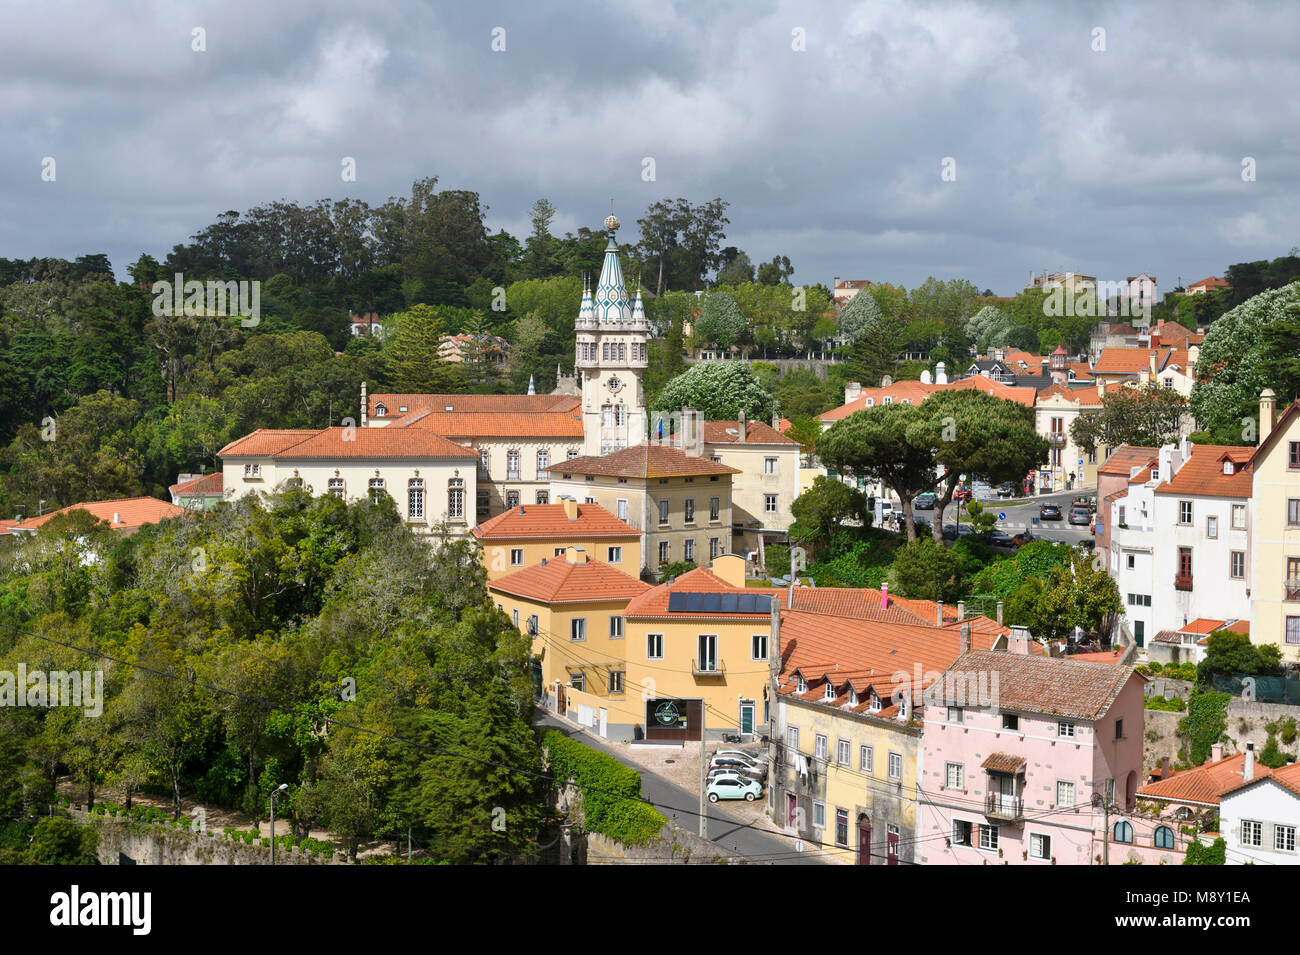 The town of Sintra, Portugal Stock Photo